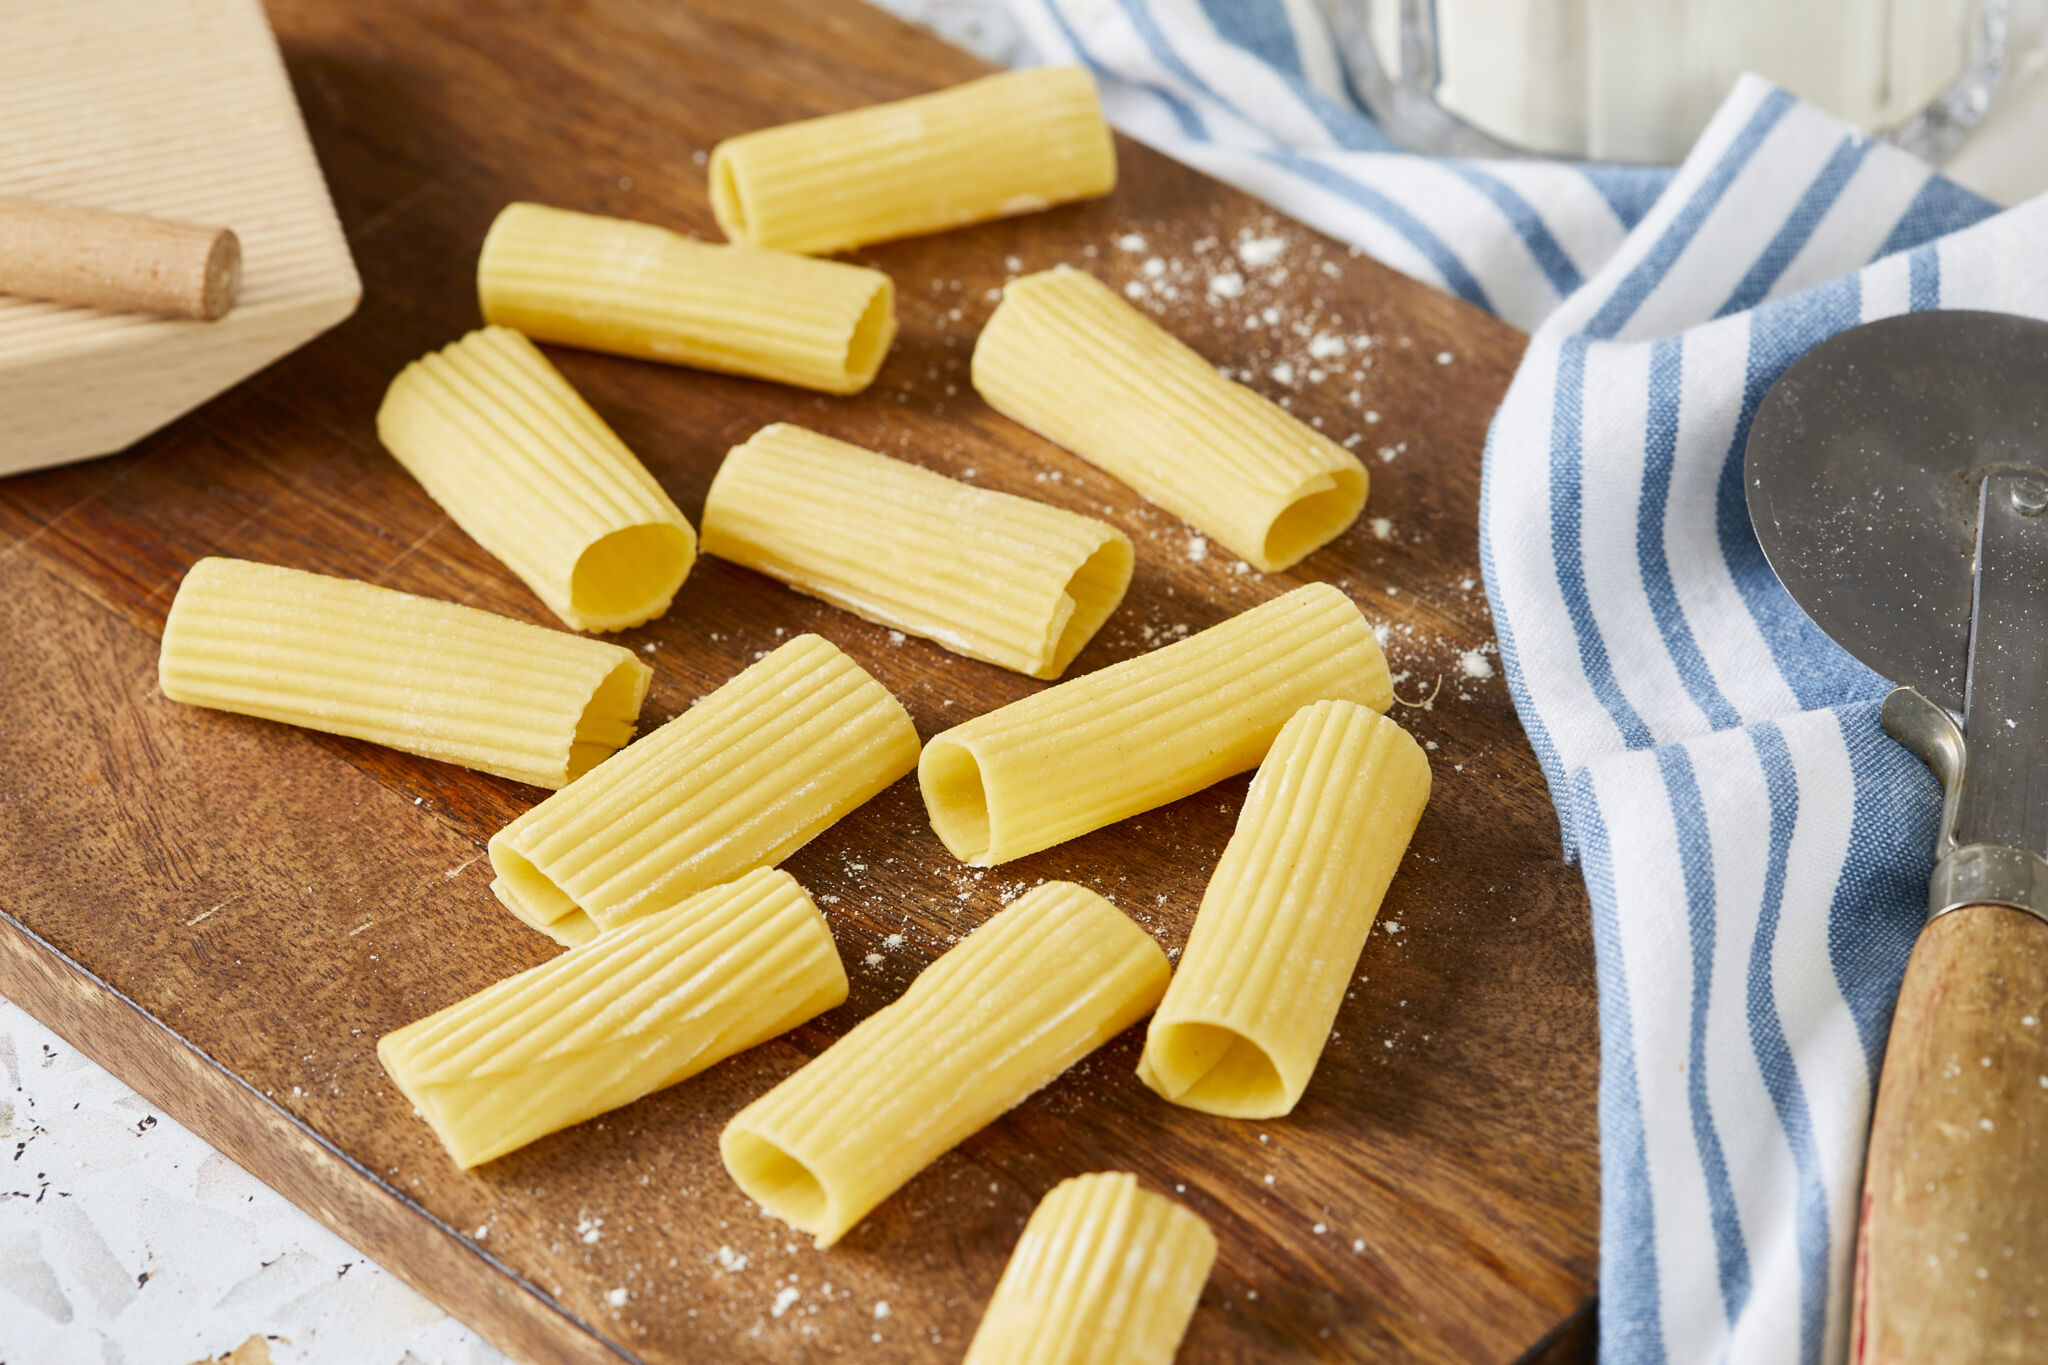 Rigatoni pasta is drying on a wooden board. It's in ridged, tubular shape and about 2 inches long with squared-off ends. It got the yellow color from semolina flour. A gnocchi board is on the left and a pasta cutter is on the right.